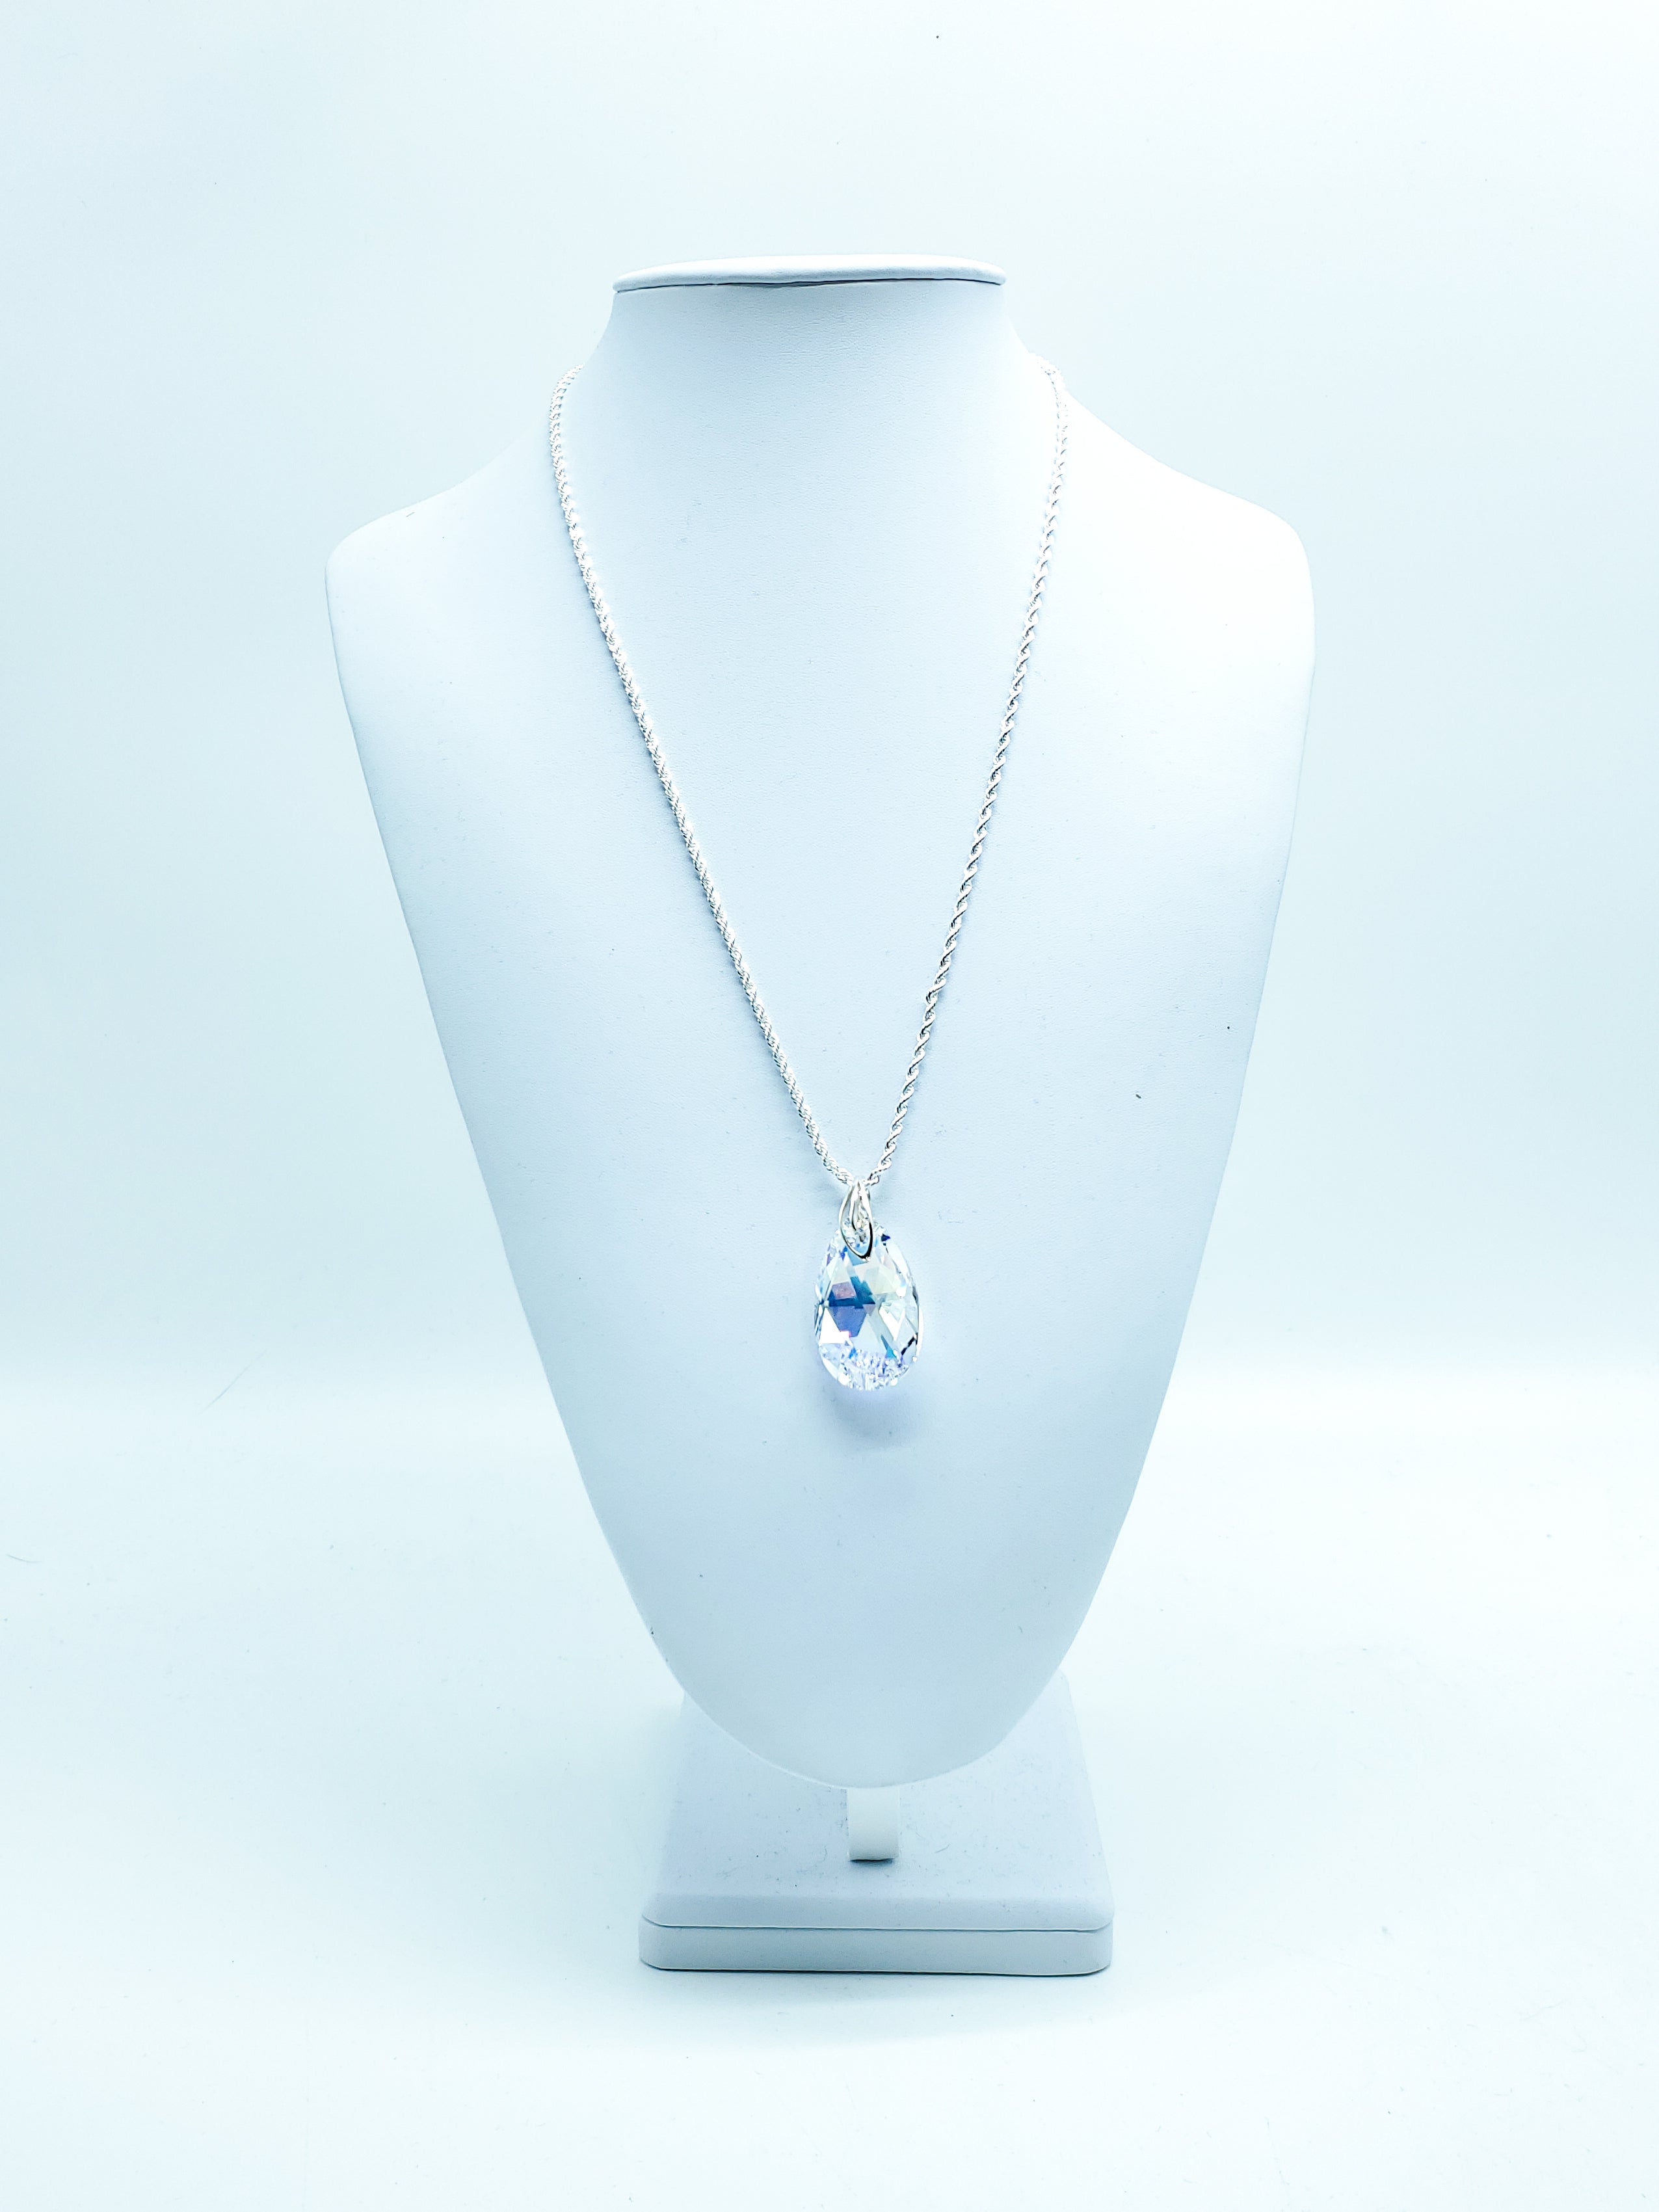 Pear "Crystal Aurore Boreale" Swarovski Crystal on Leaf bail and Sterling Silver Snake Chain - The Caffeinated Raven